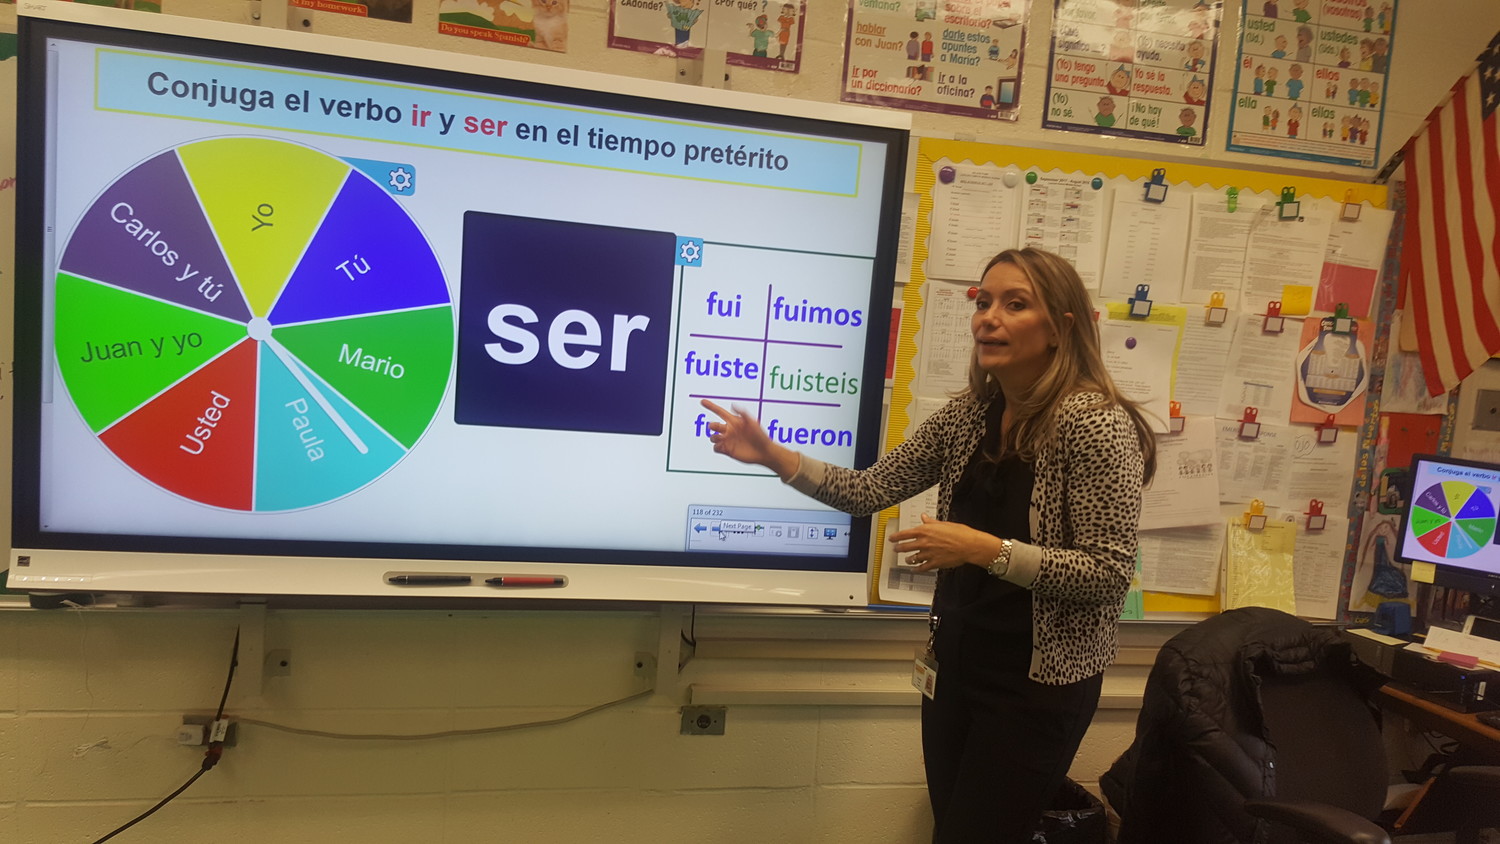 Irelanda Feil, the Spanish teacher at Lincoln Orens Middle School in Island Park, has an electronic blackboard that displays different ways of conjugating verbs.